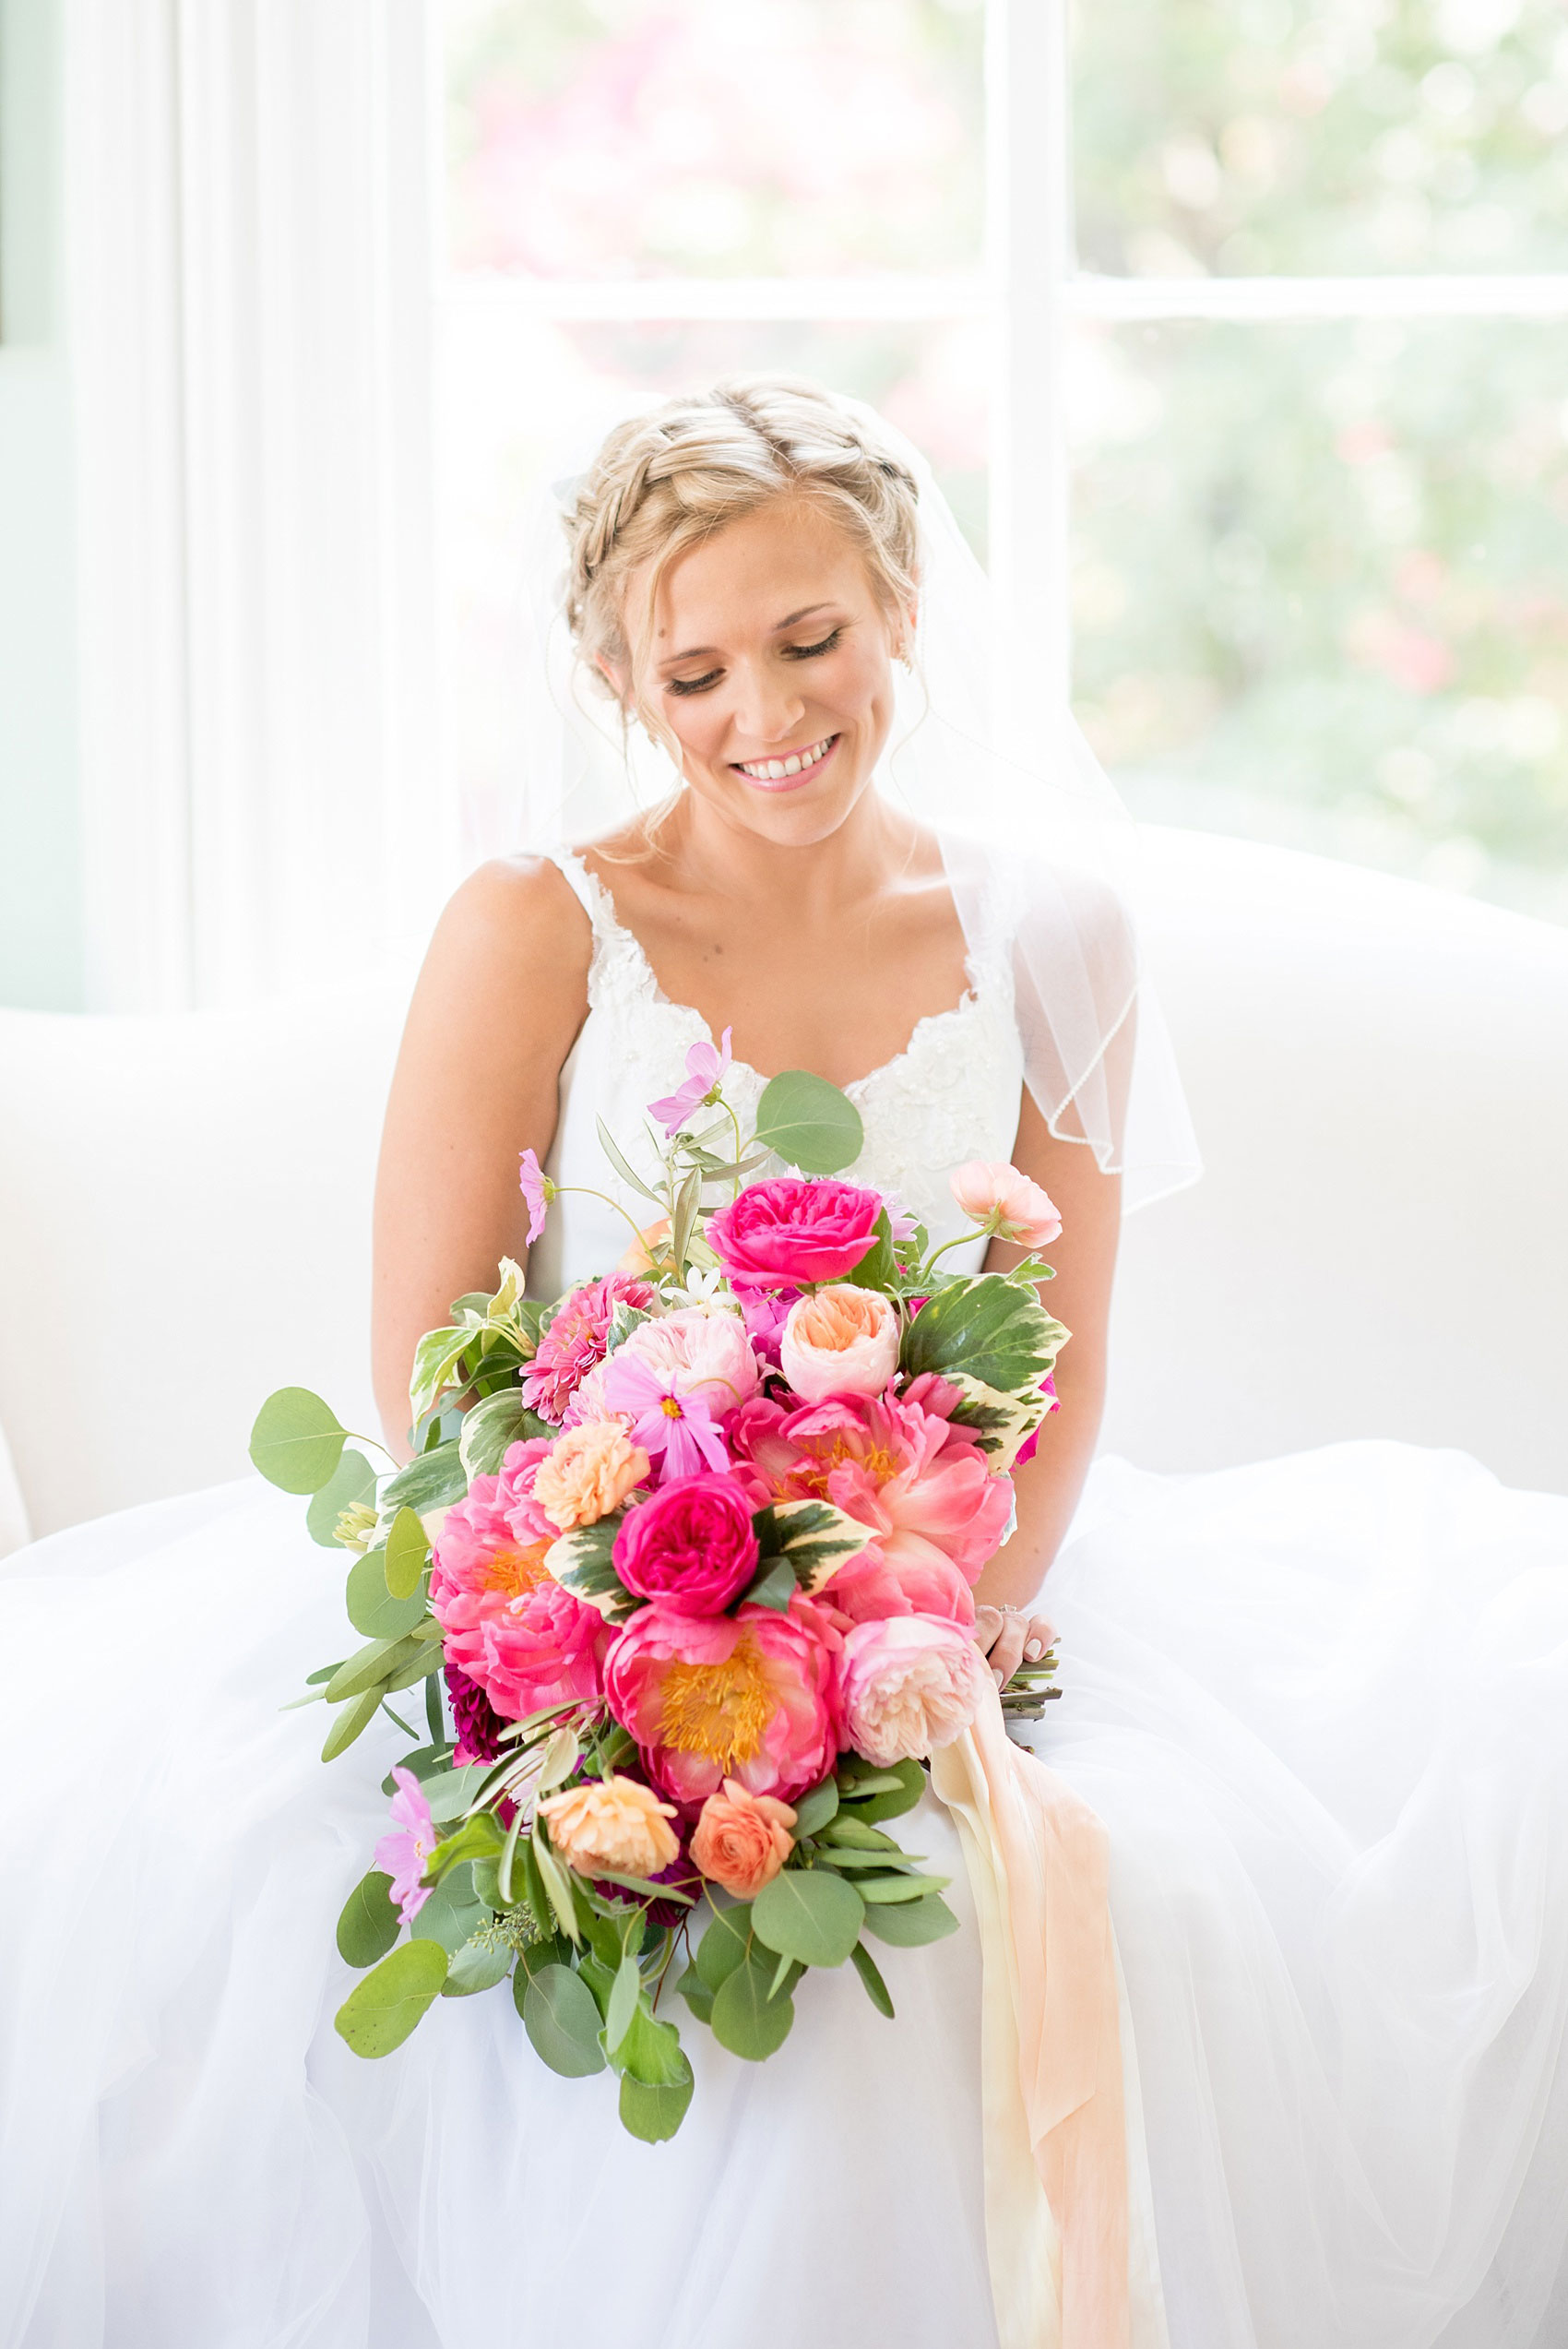 Mikkel Paige Photography wedding photos at The Merrimon-Wynne House in downtown Raleigh. A bridal portrait with the bride's tulle skirt and colorful bouquet by Meristem Floral.